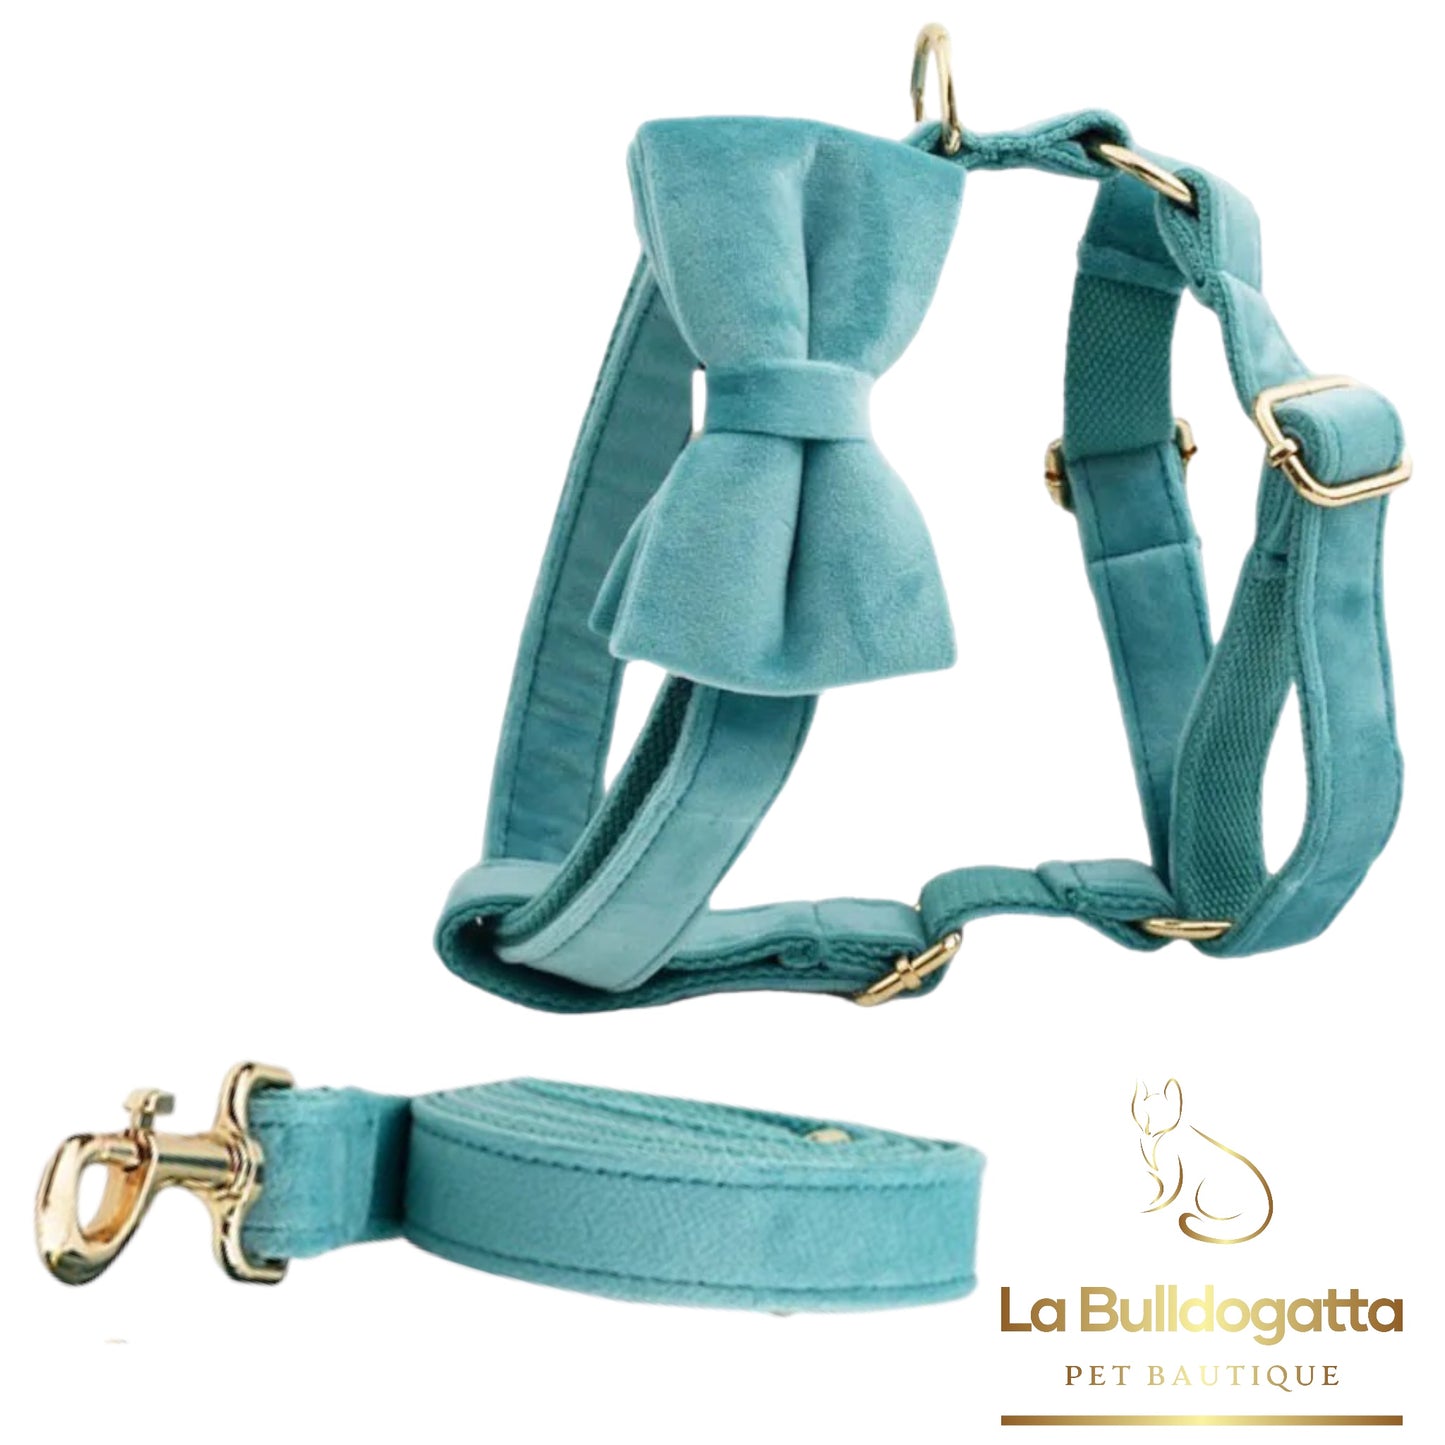 H-shaped harness, leash and tiffany green velvet bow set